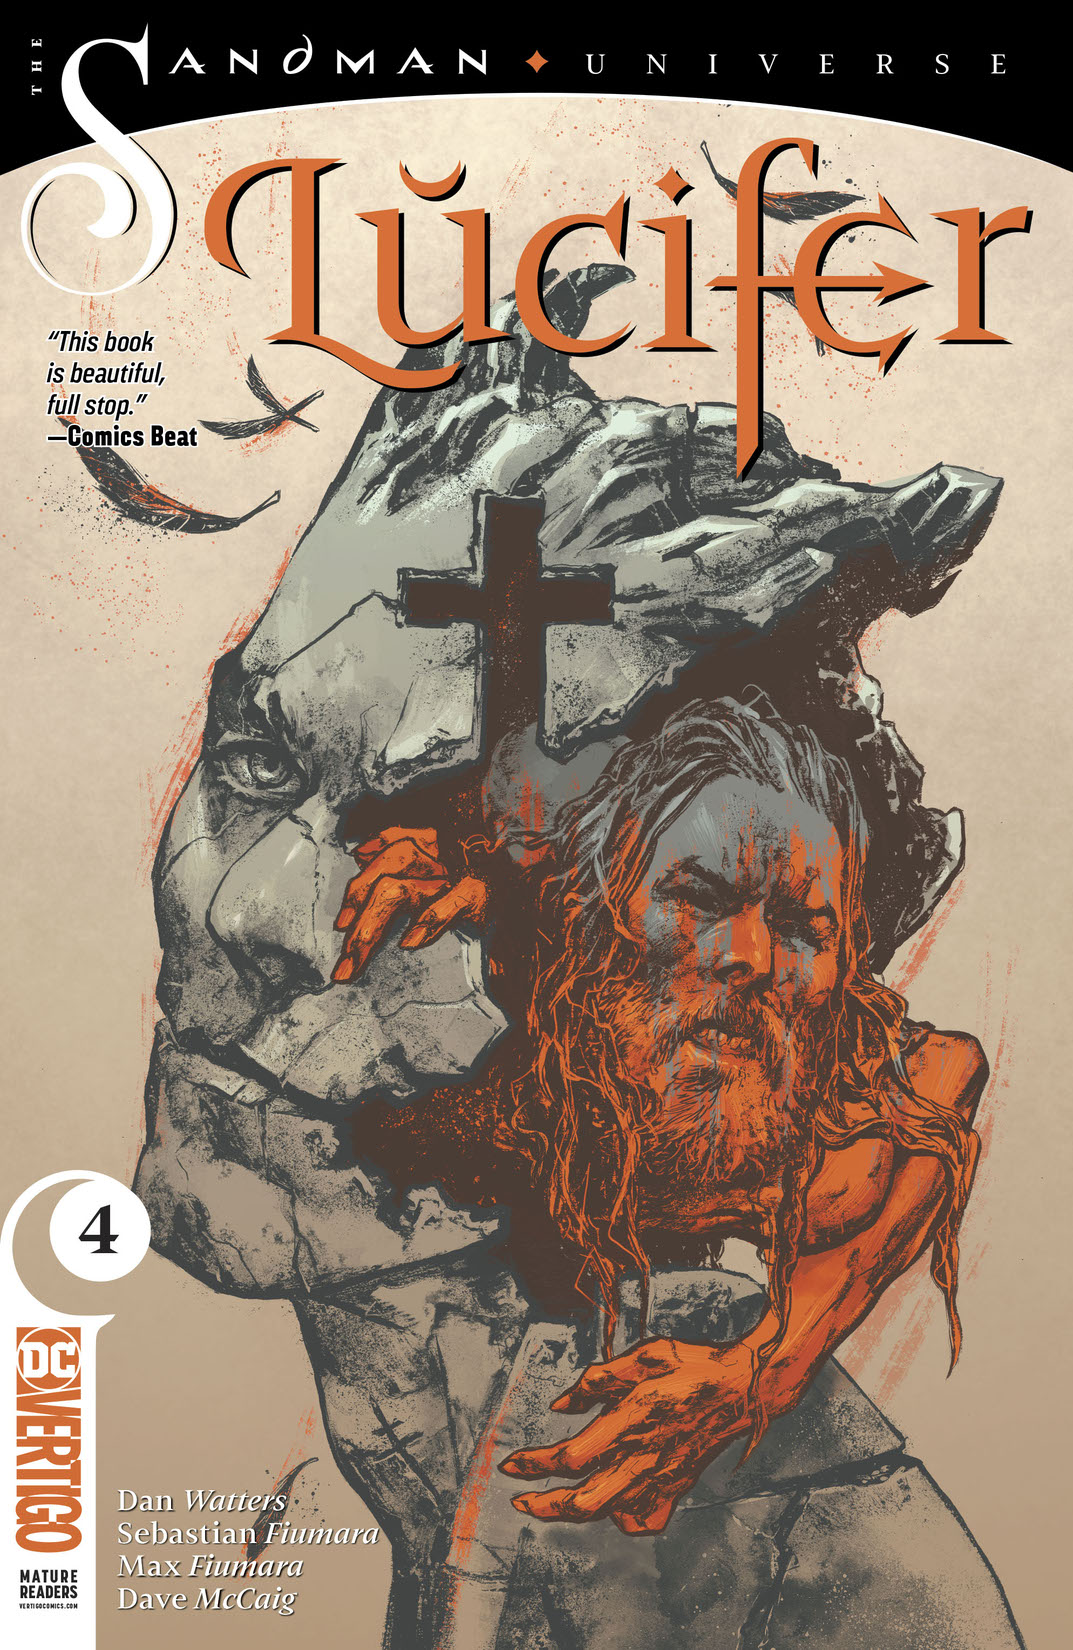 Lucifer #4 preview images